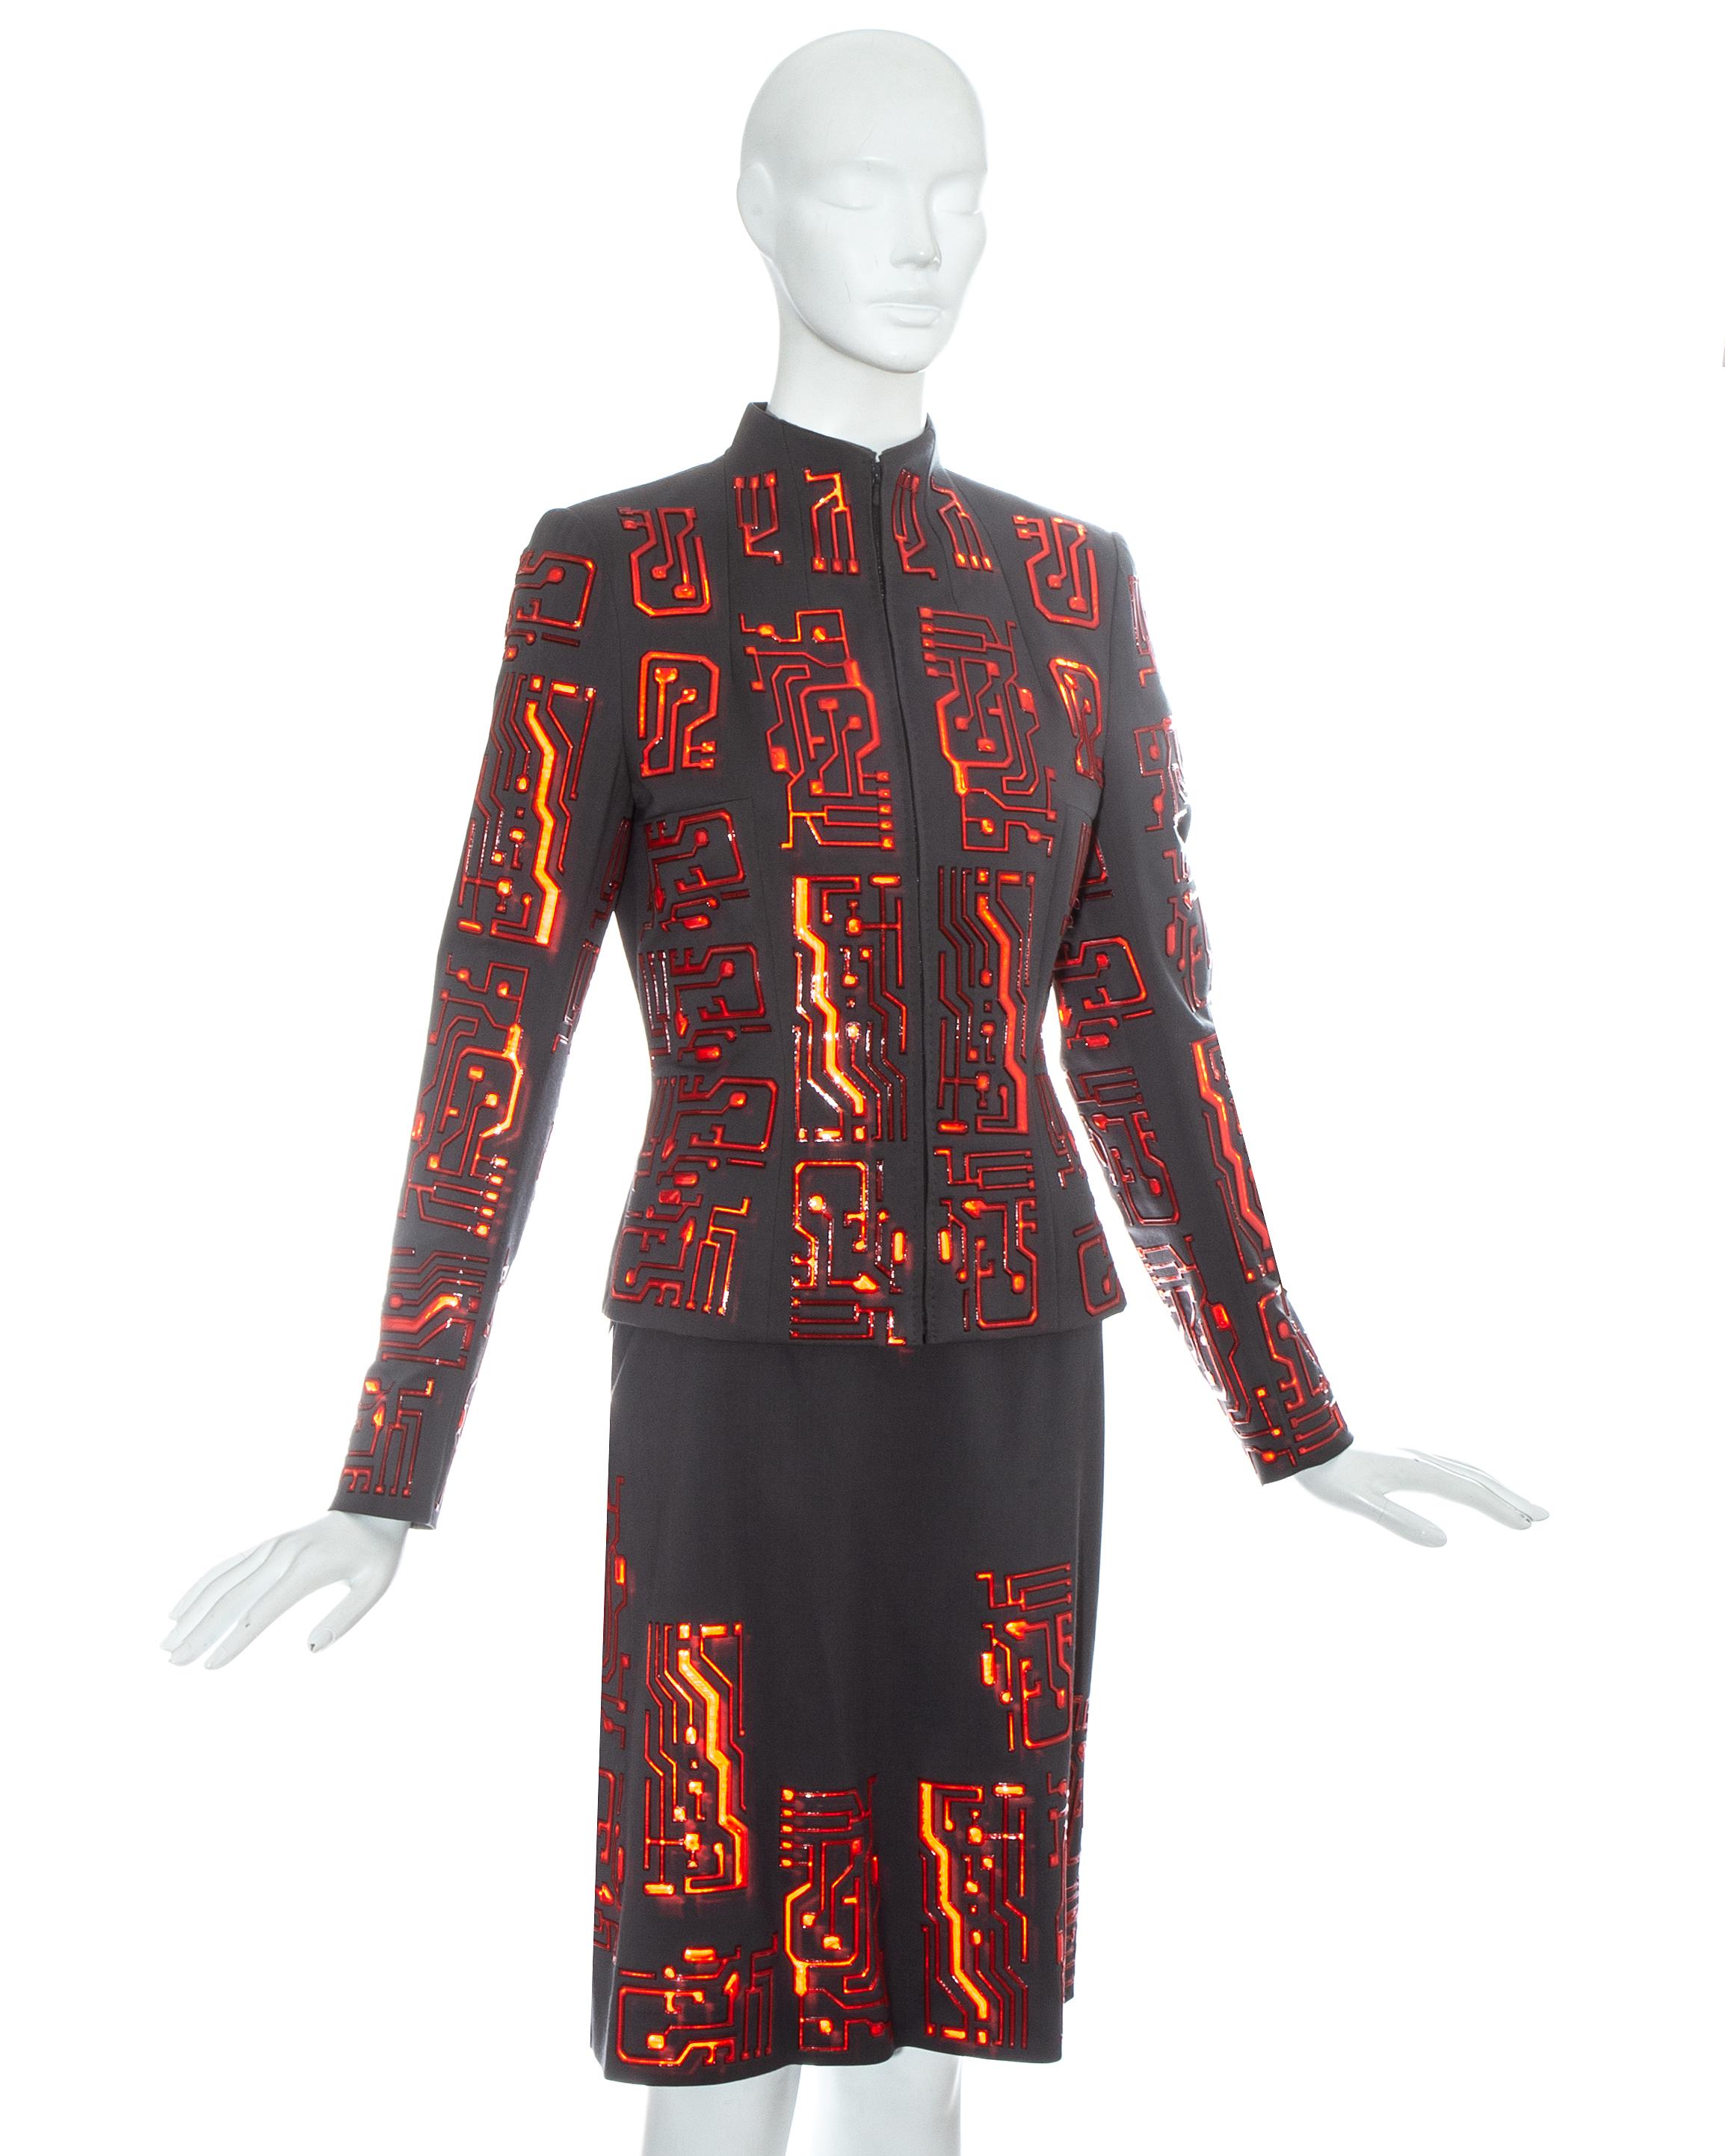 Black Givenchy by Alexander McQueen grey wool circuit board skirt suit, fw 1999